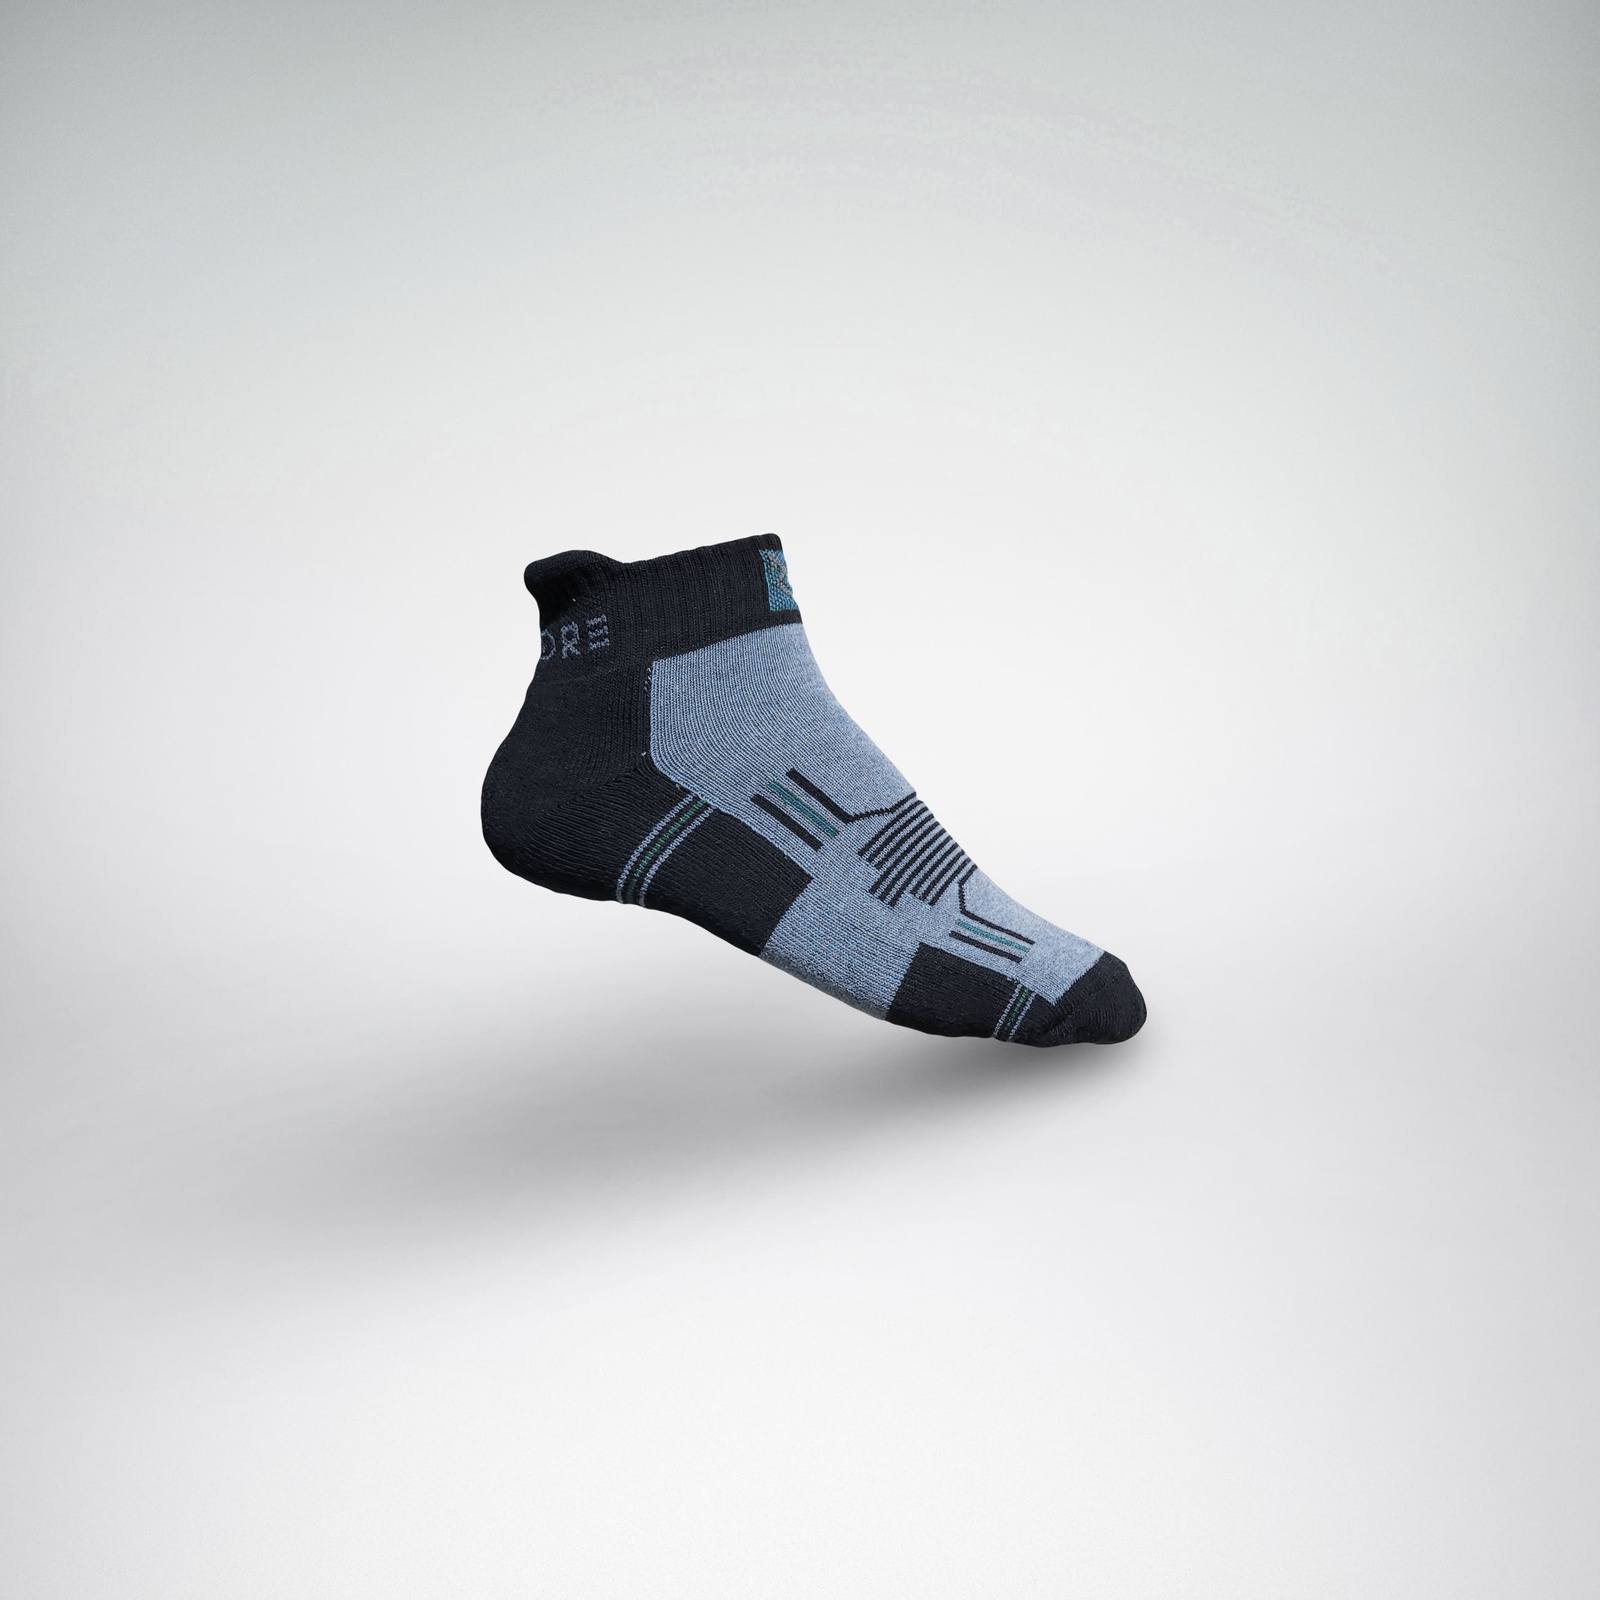 Anti-Microbial Performance Socks | Ankle Length | Pack of 3 | Size UK 7-11 Sporting Goods